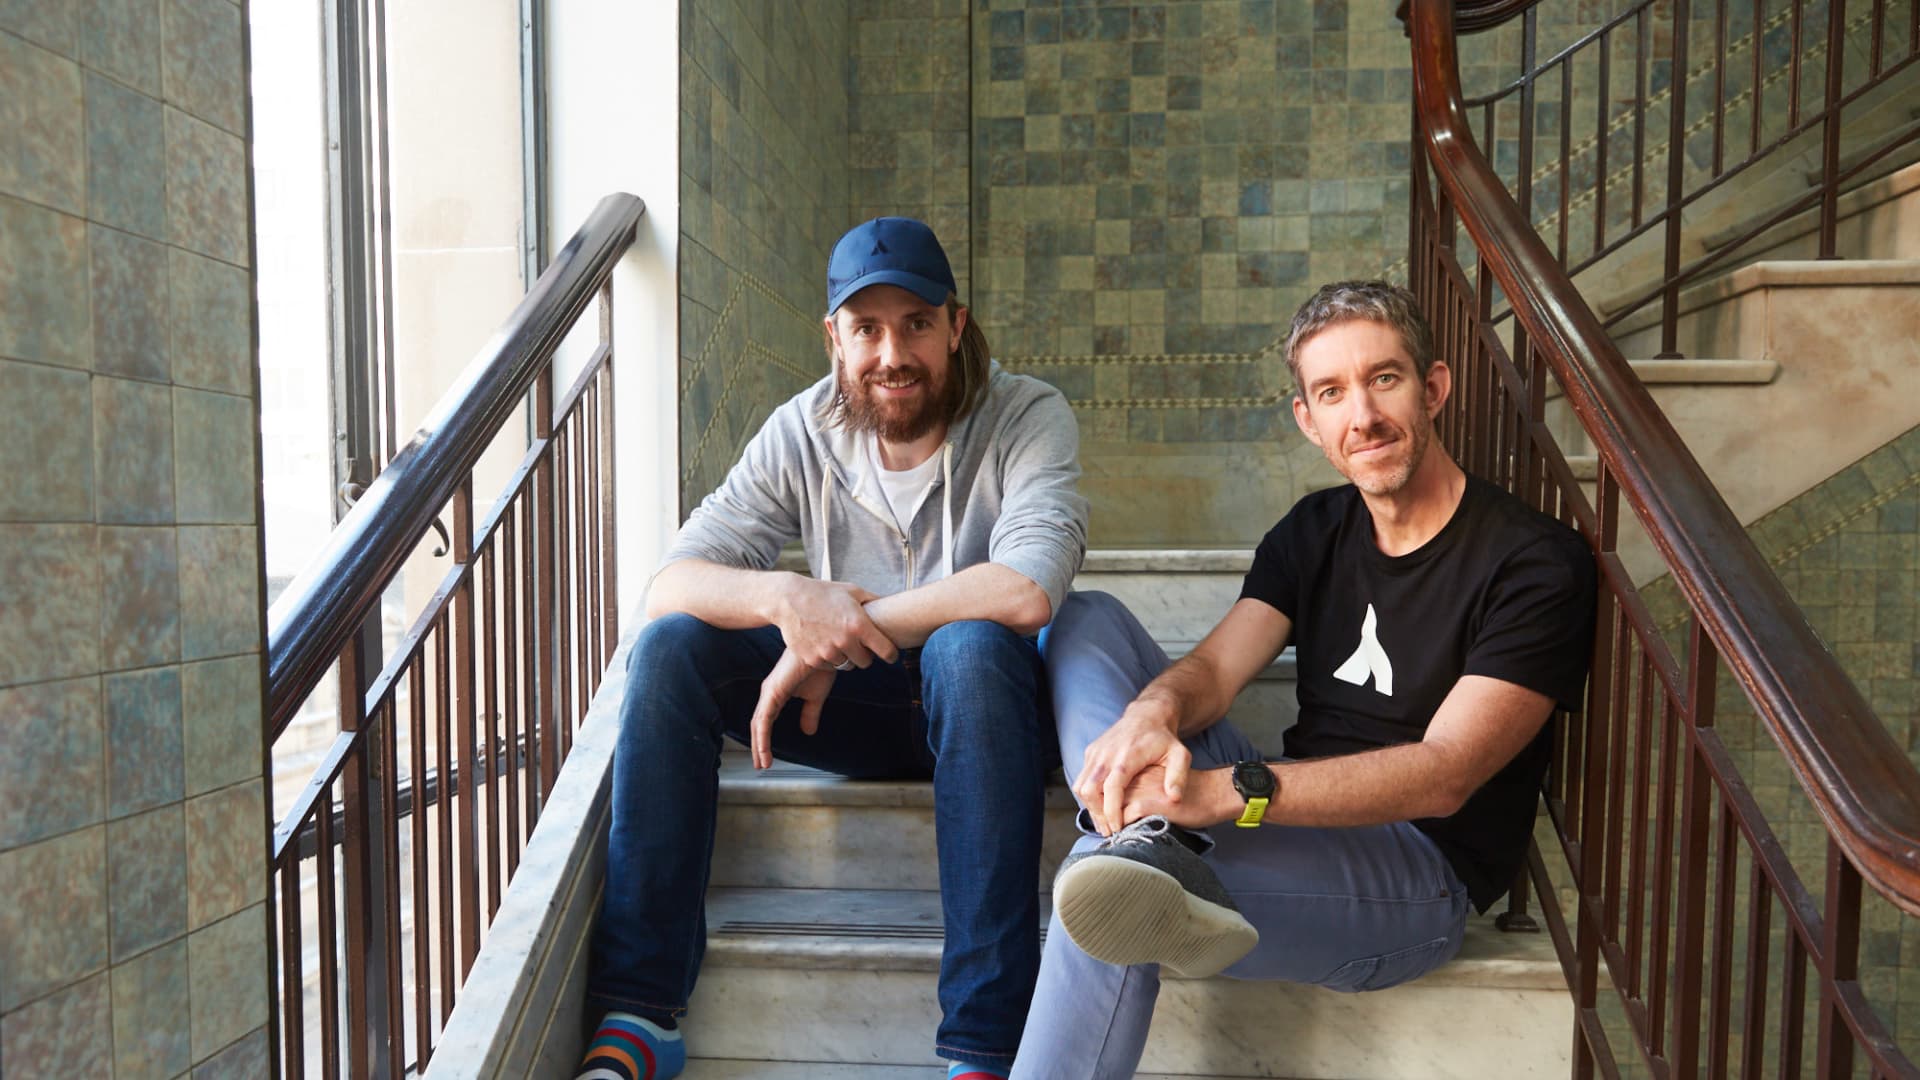 Atlassian says customers unlikely to reduce spending as it surpasses revenue expectations